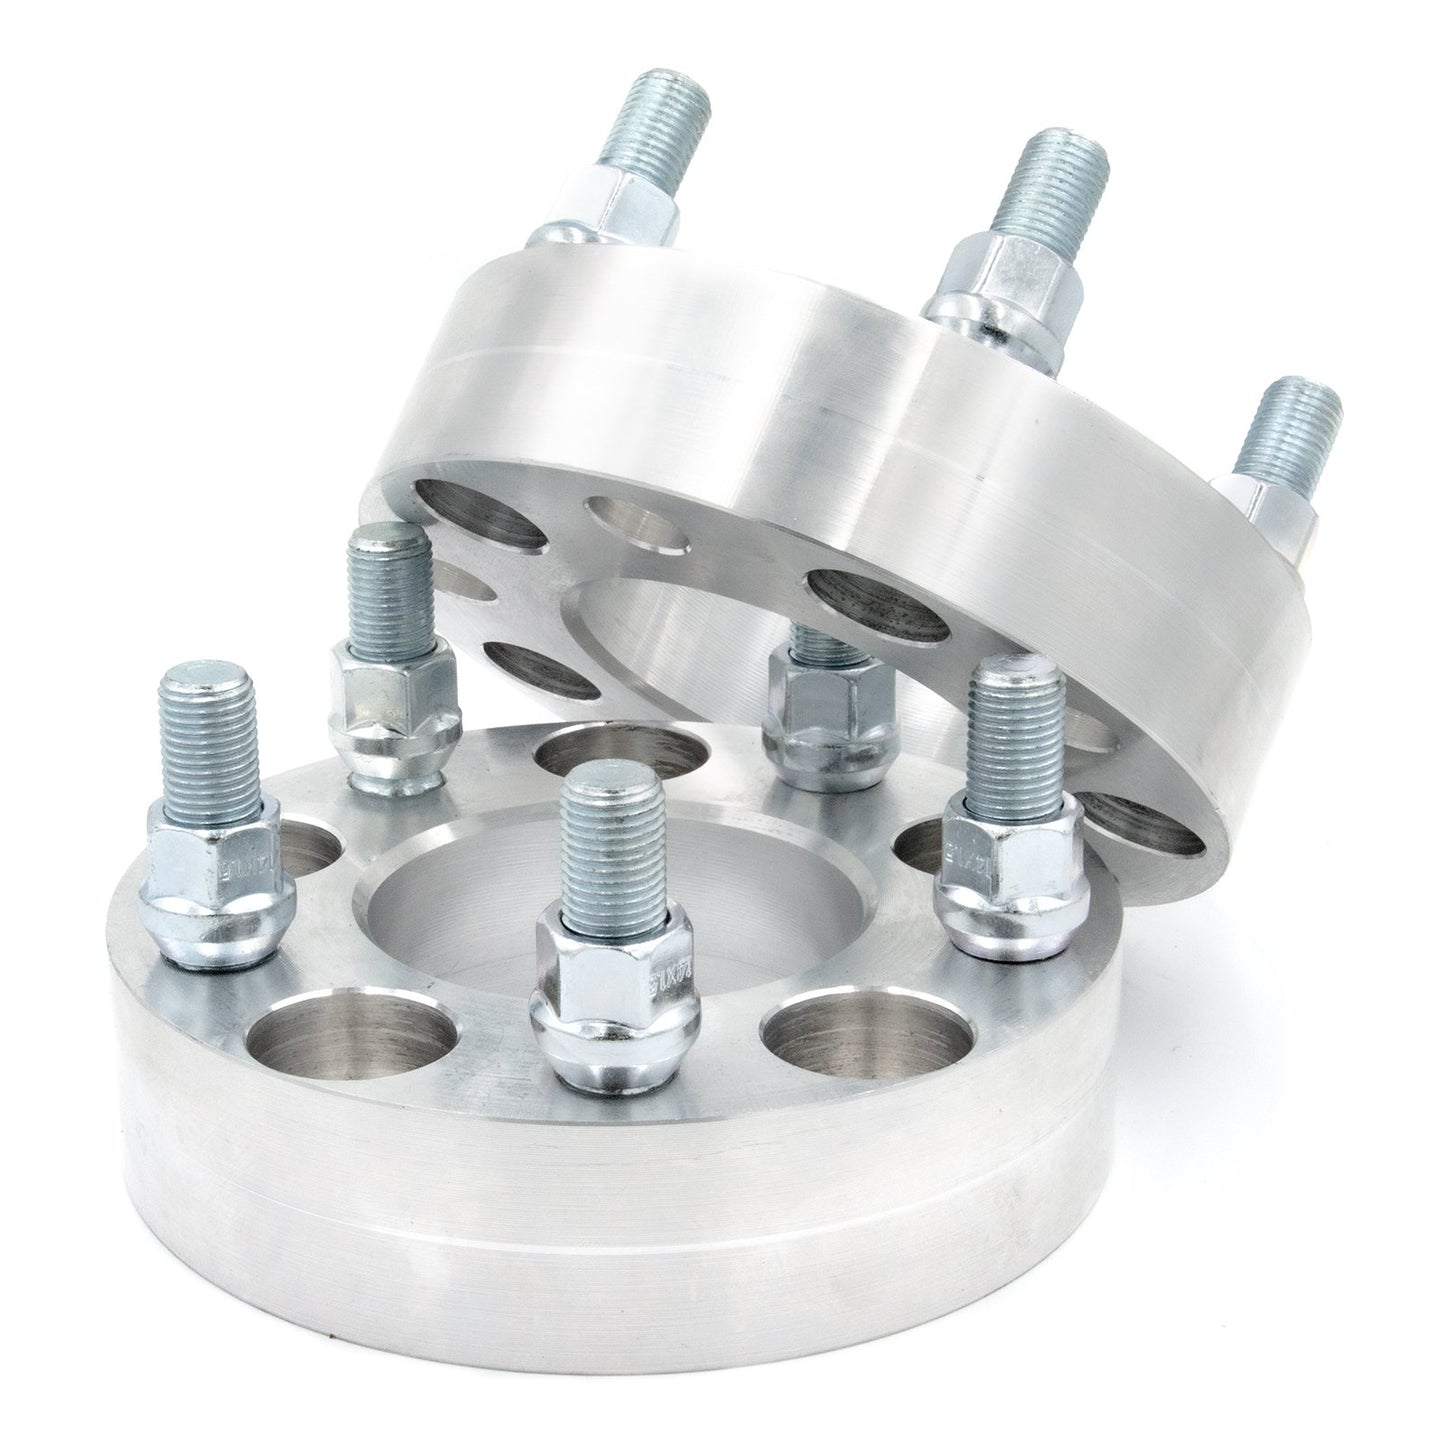 5x4.25" to 5x120 Wheel Spacer/Adapter - Thickness: 3/4"- 4"